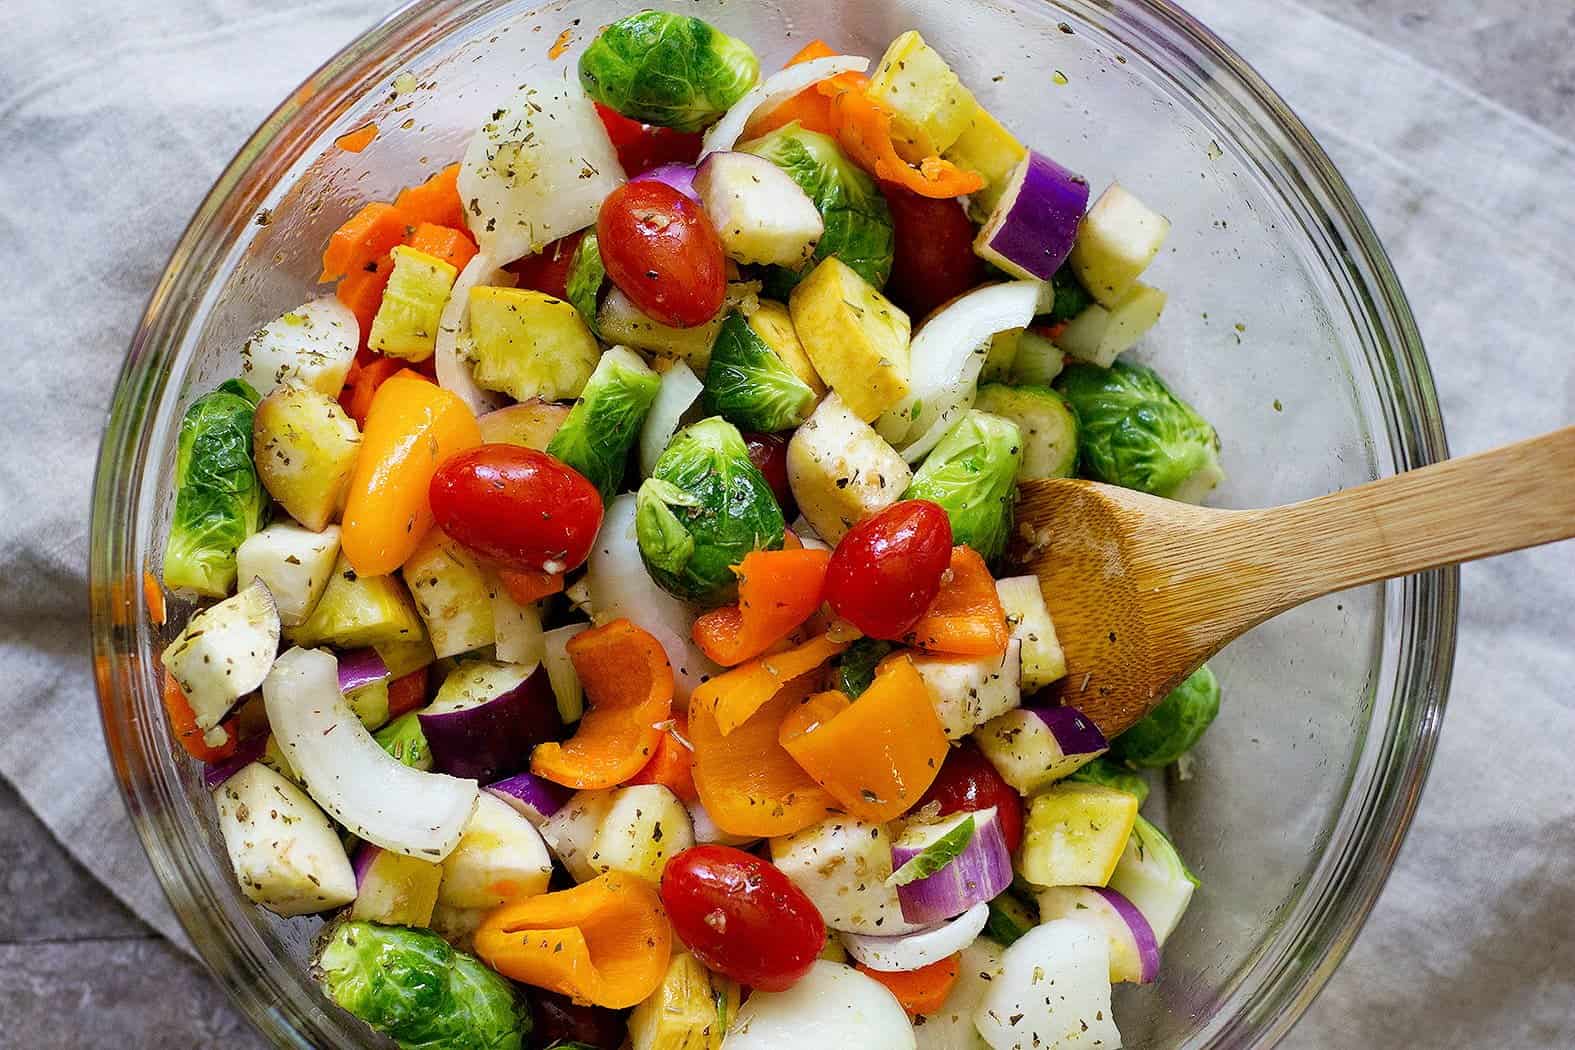 Chop all the vegetables and mix them with olive oil and spices in a large bowl. 